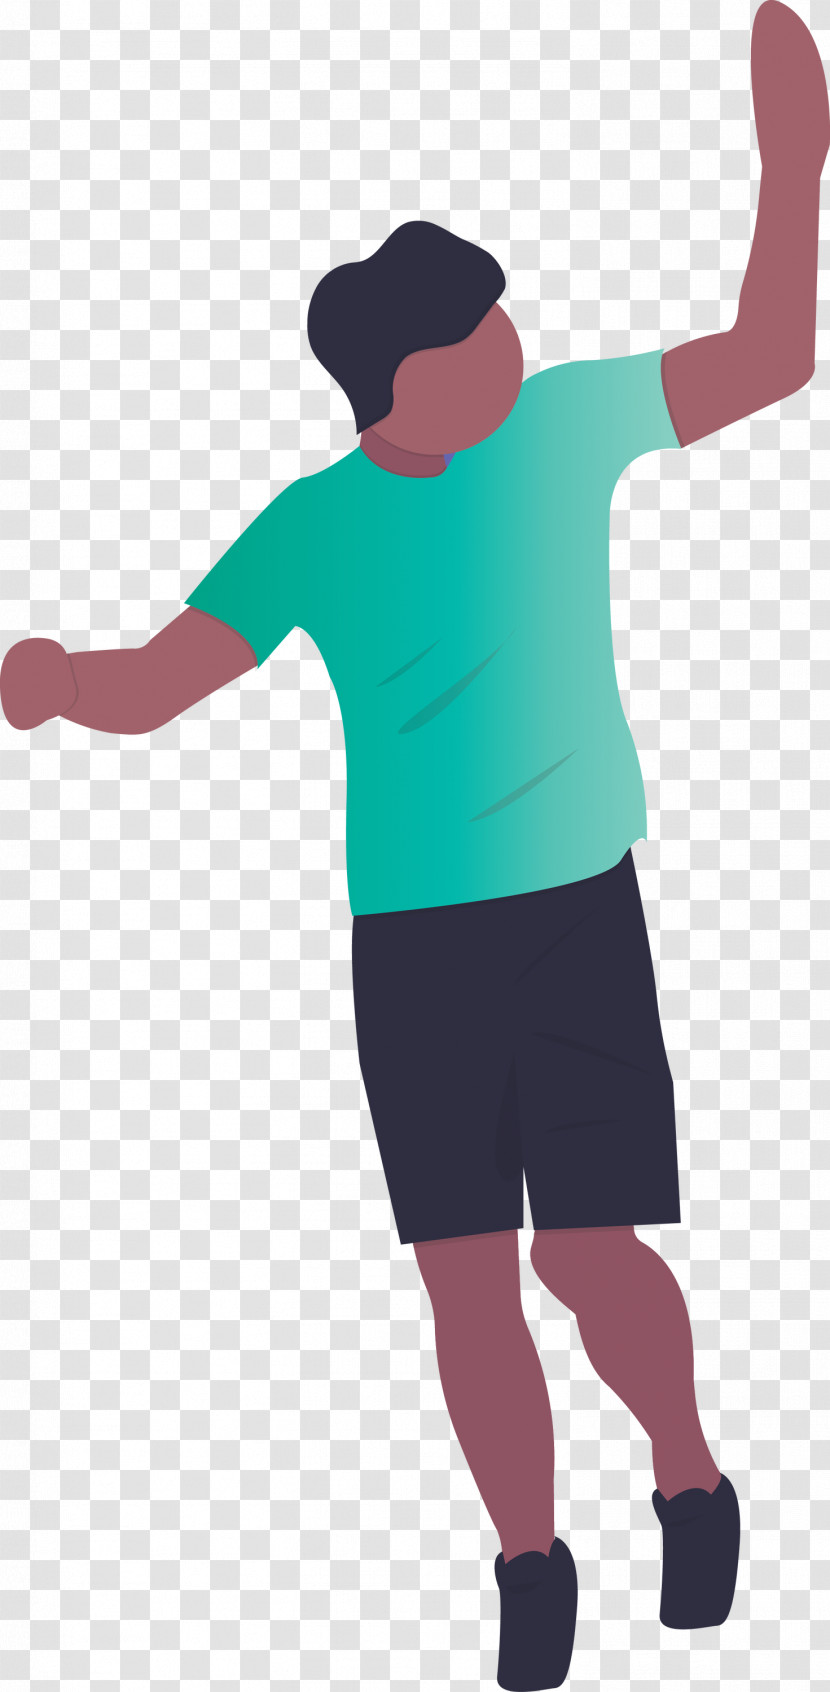 Standing Arm Joint Sleeve Gesture Transparent PNG